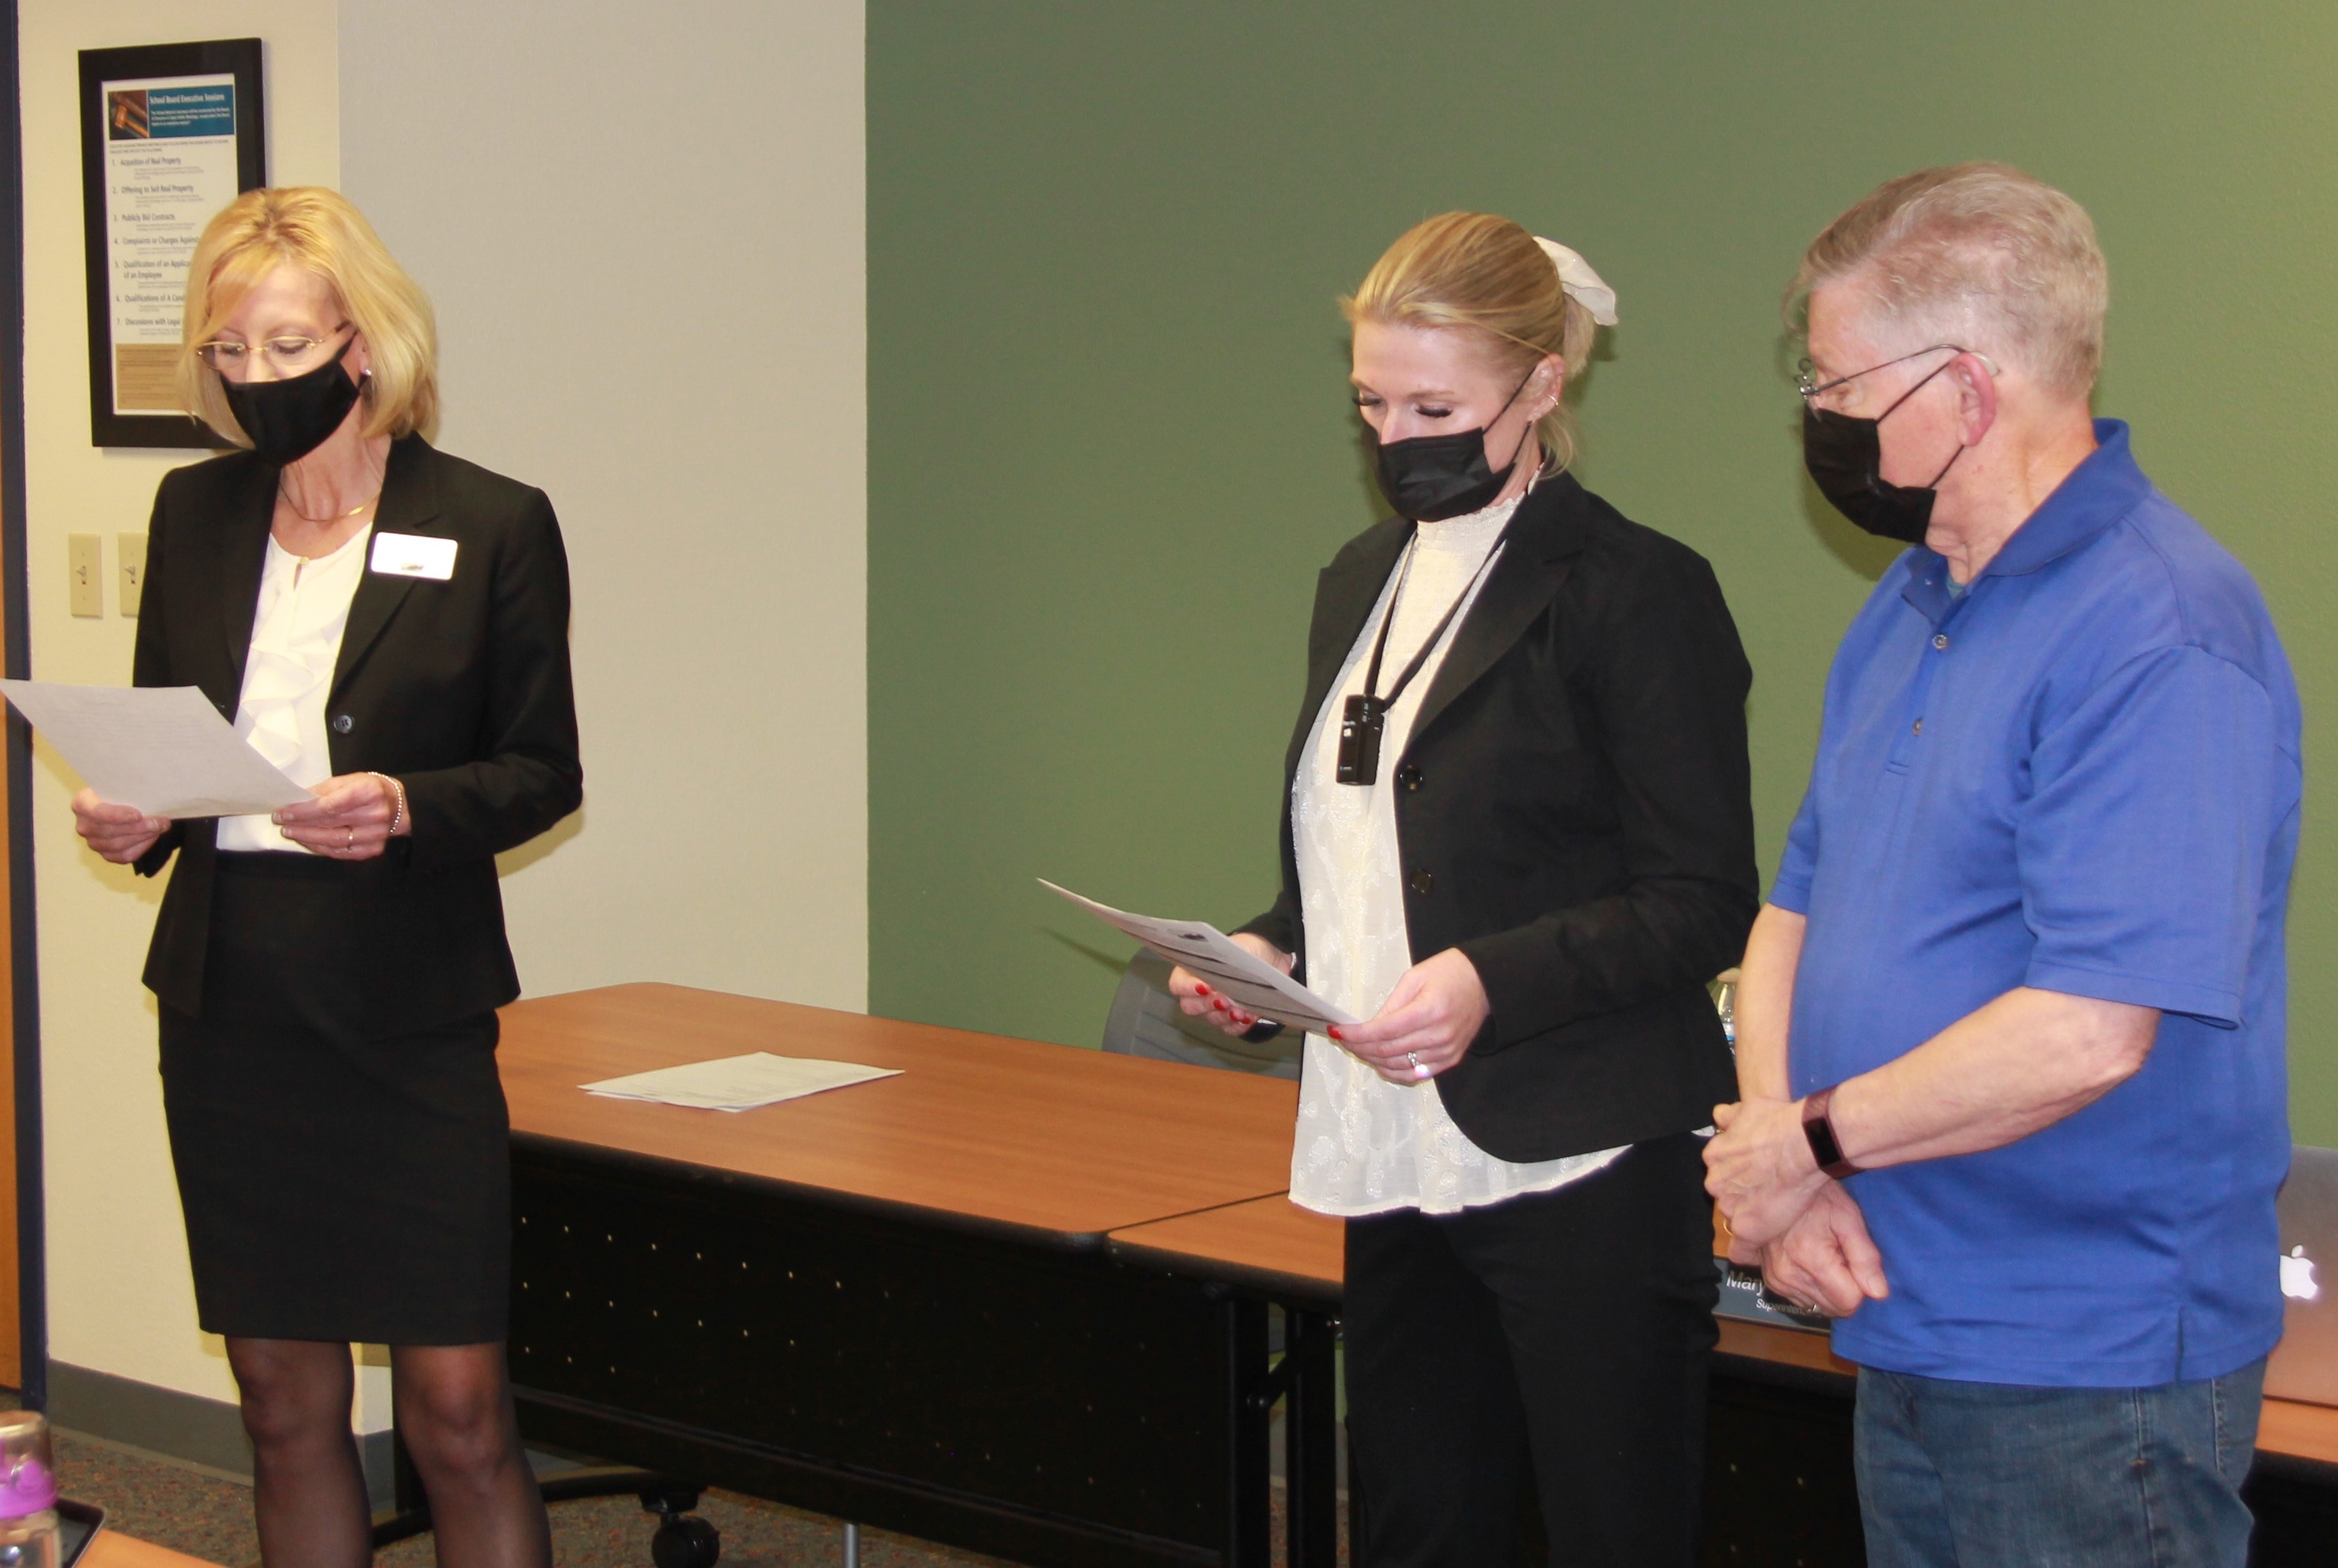 mary templeton administers the oath of office to chuck carpenter, sadie mckenzie  at the 12-14-2021 board meeting